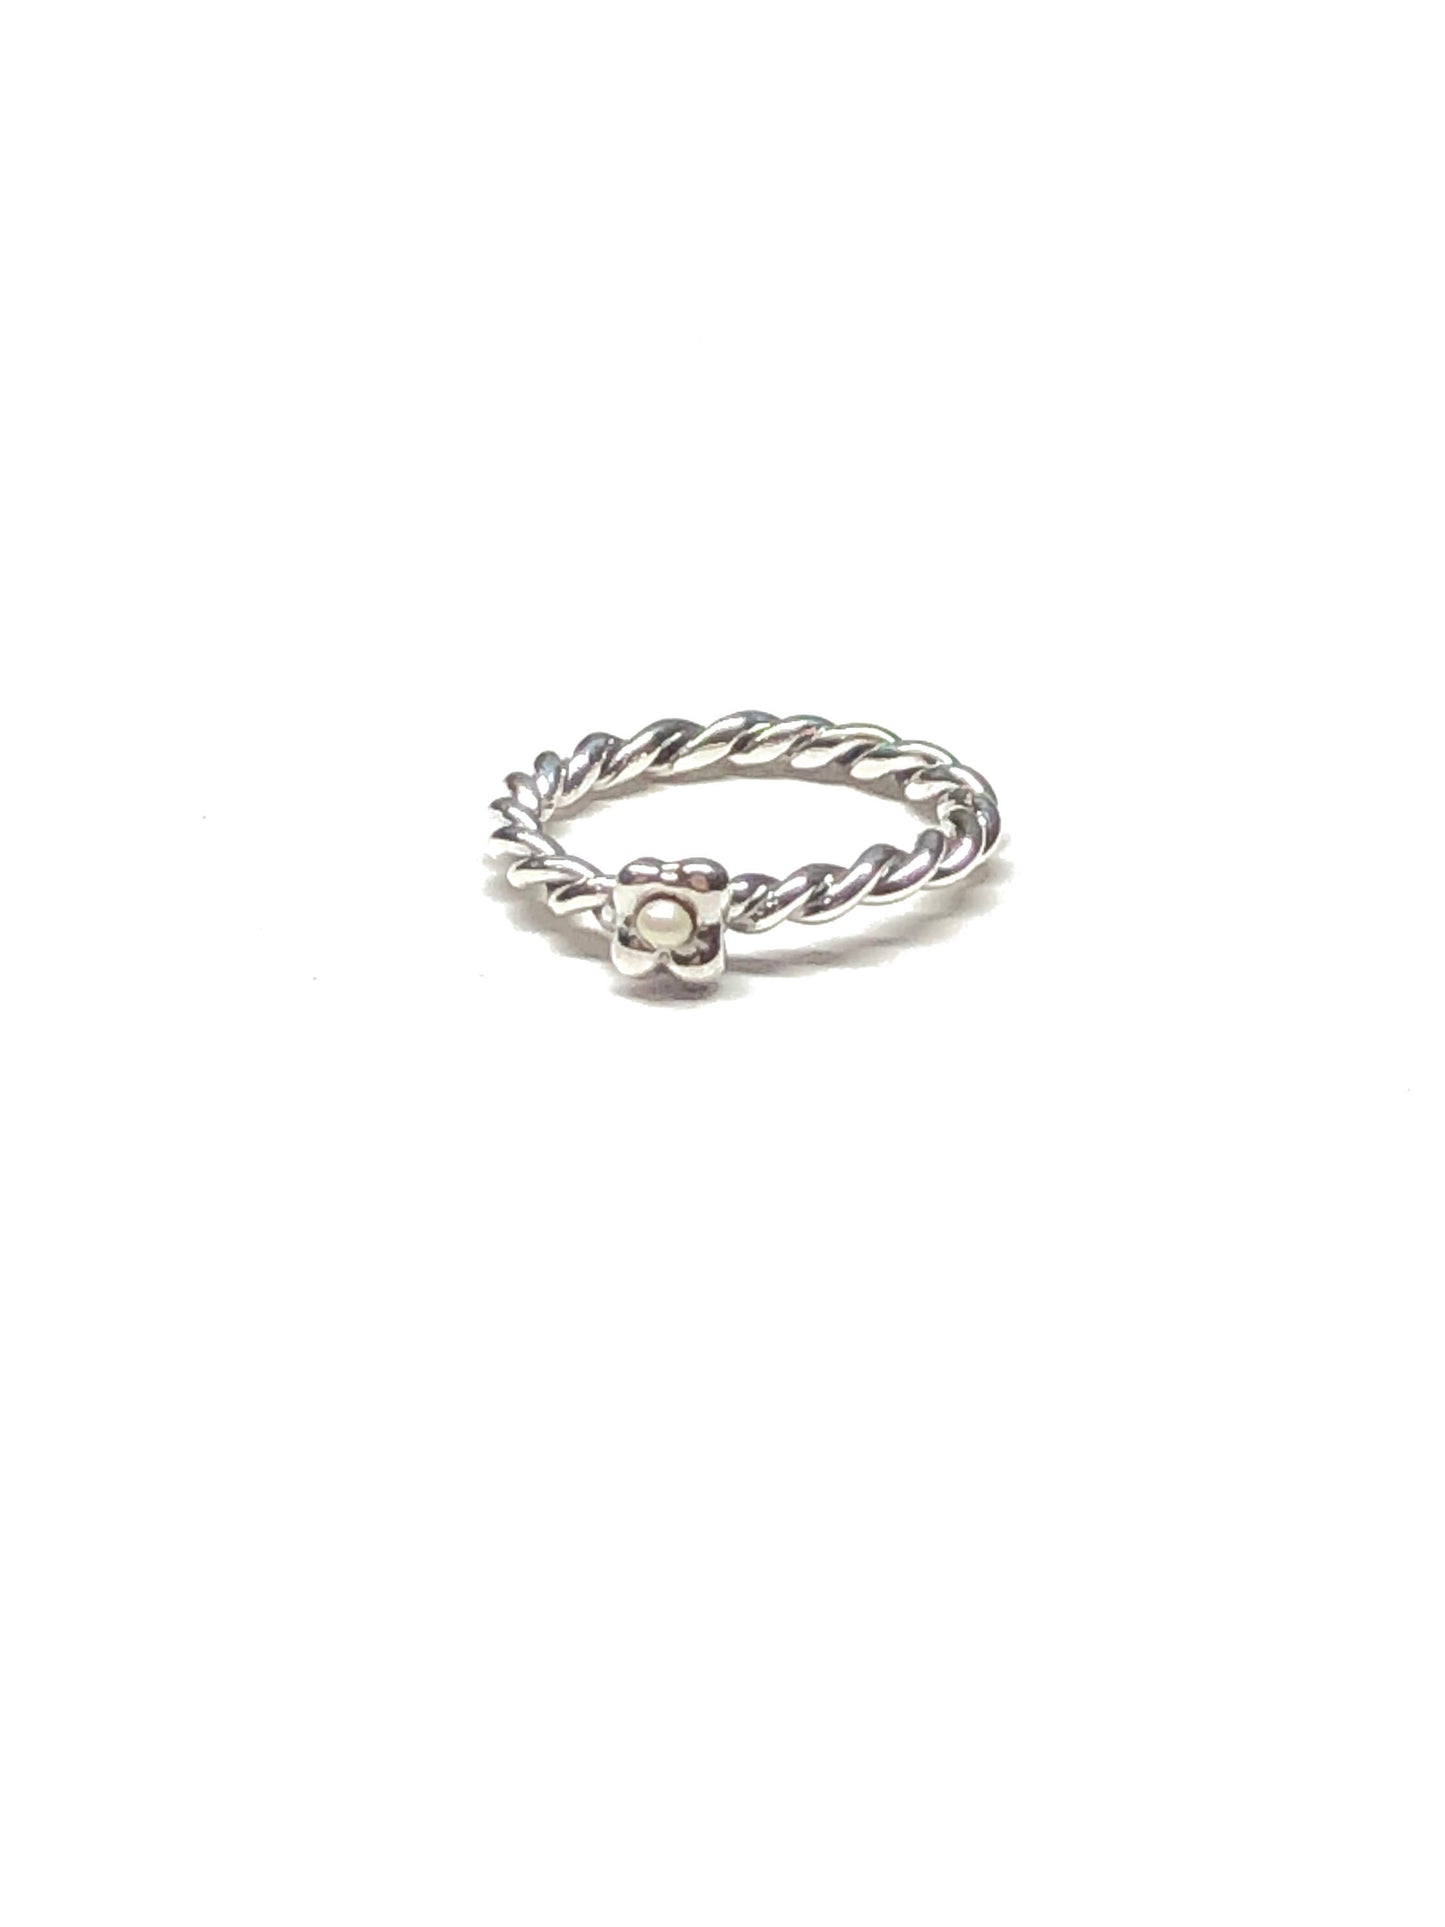 Product photo of Mini Mermaid Ring in Sterling Silver. This is a high quality one-of-a-kind ring featuring a tiny freshwater pearl, finished in a high-polish. 